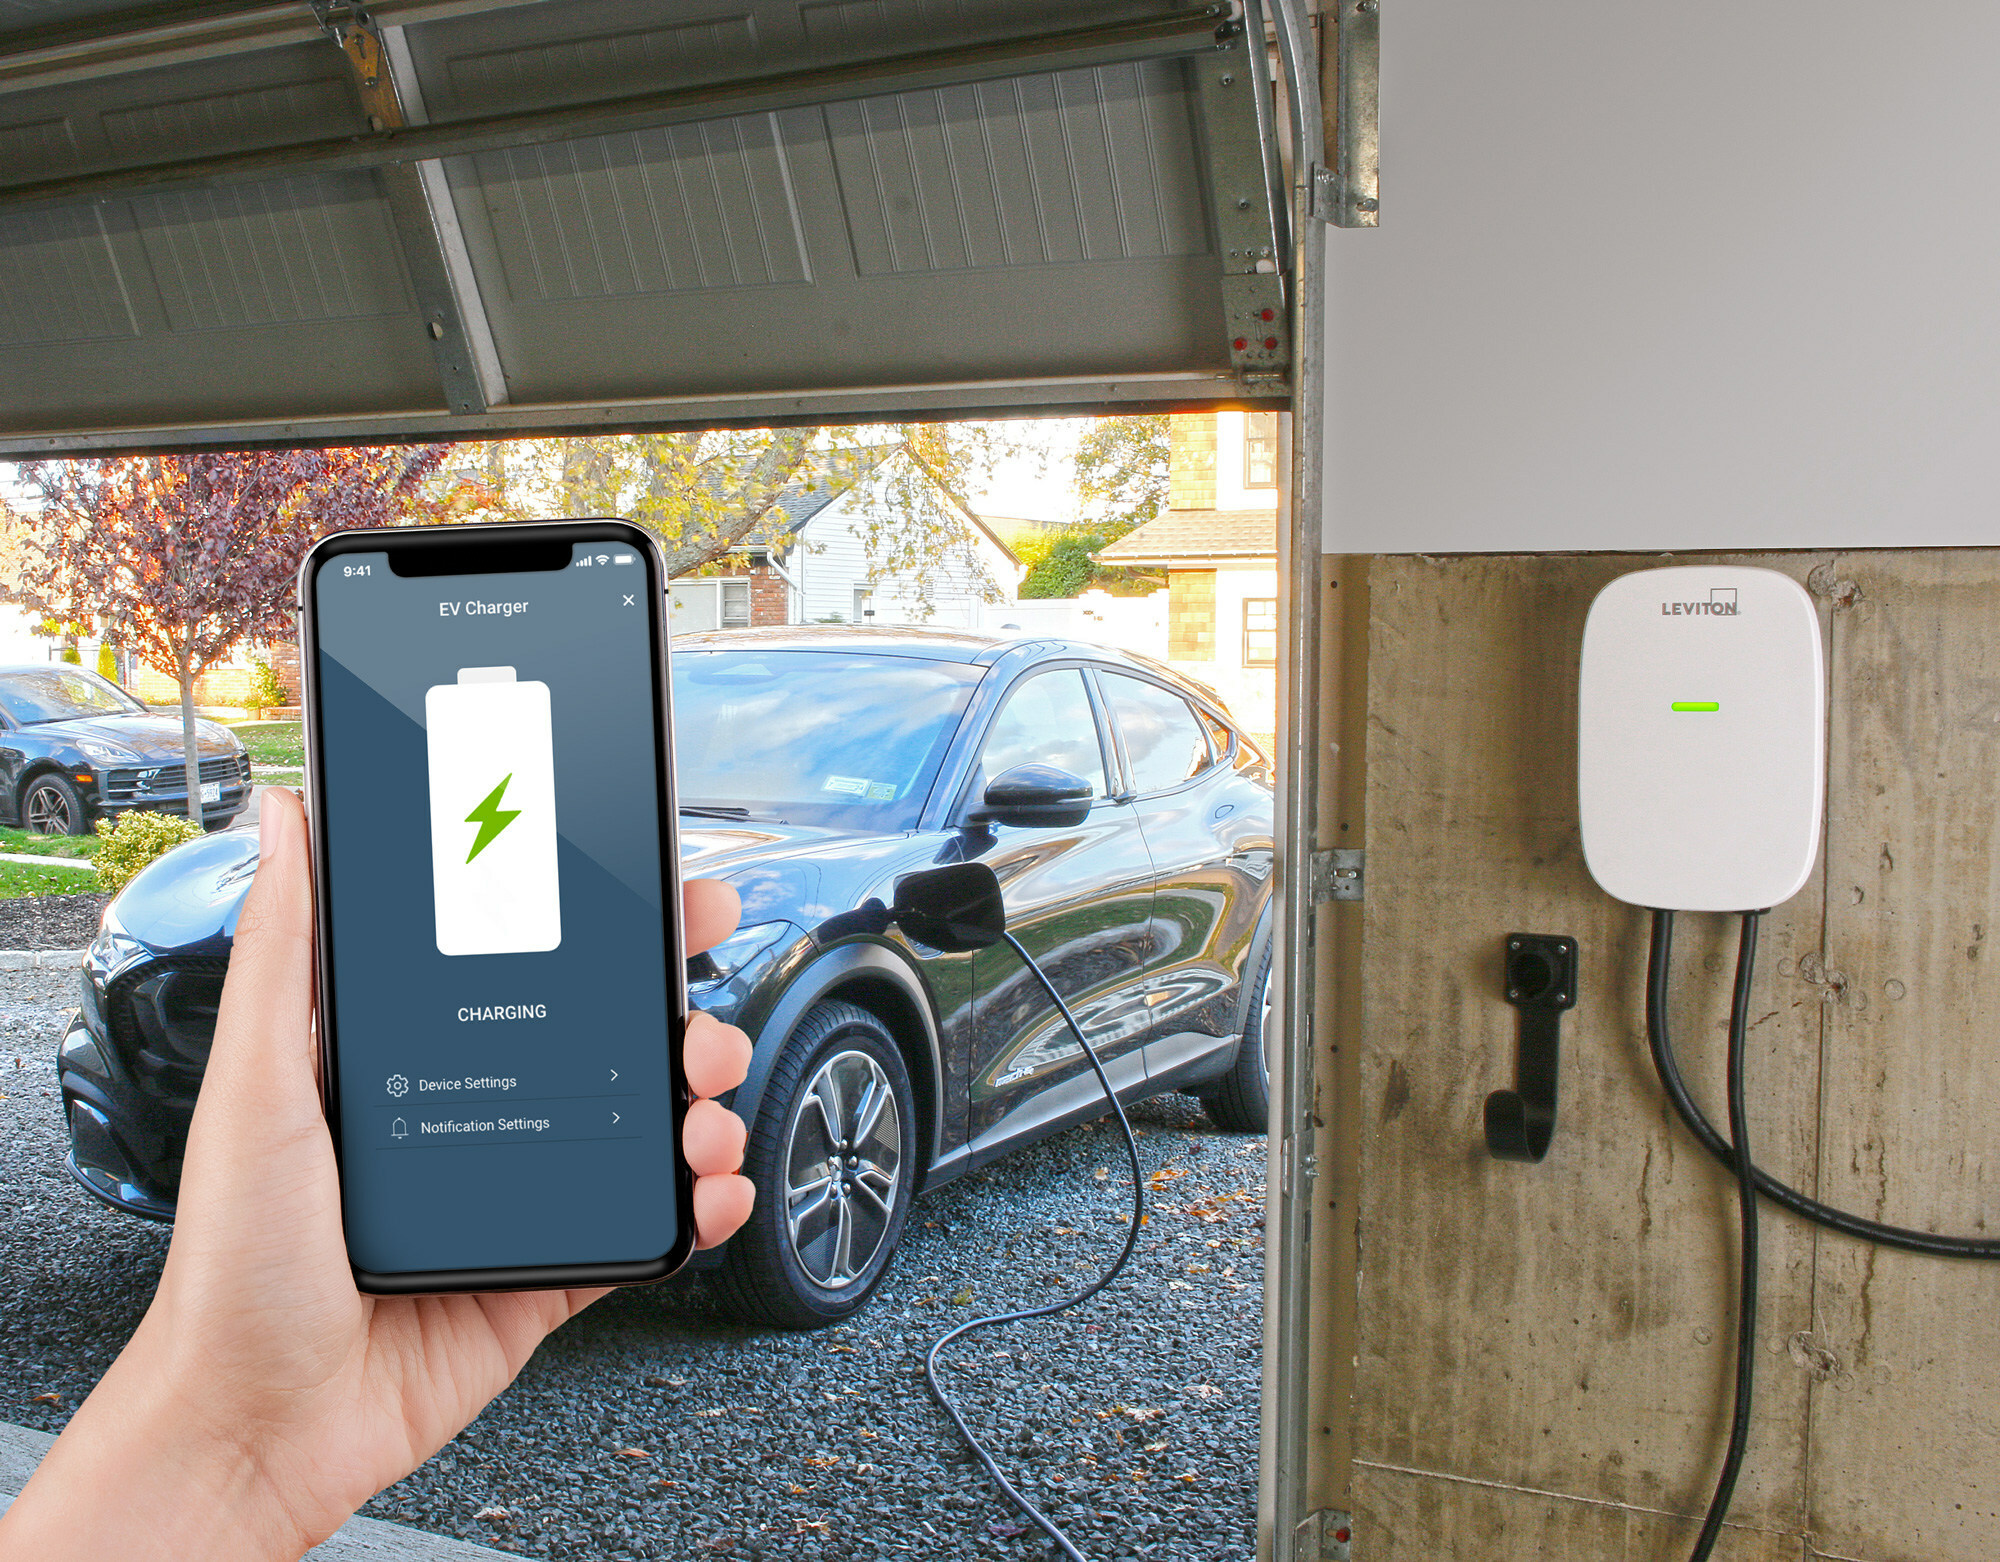 Using the My Leviton App, users can remotely view the status of the charging station and when it is ready to charge, in an active charging session or when a session has ended